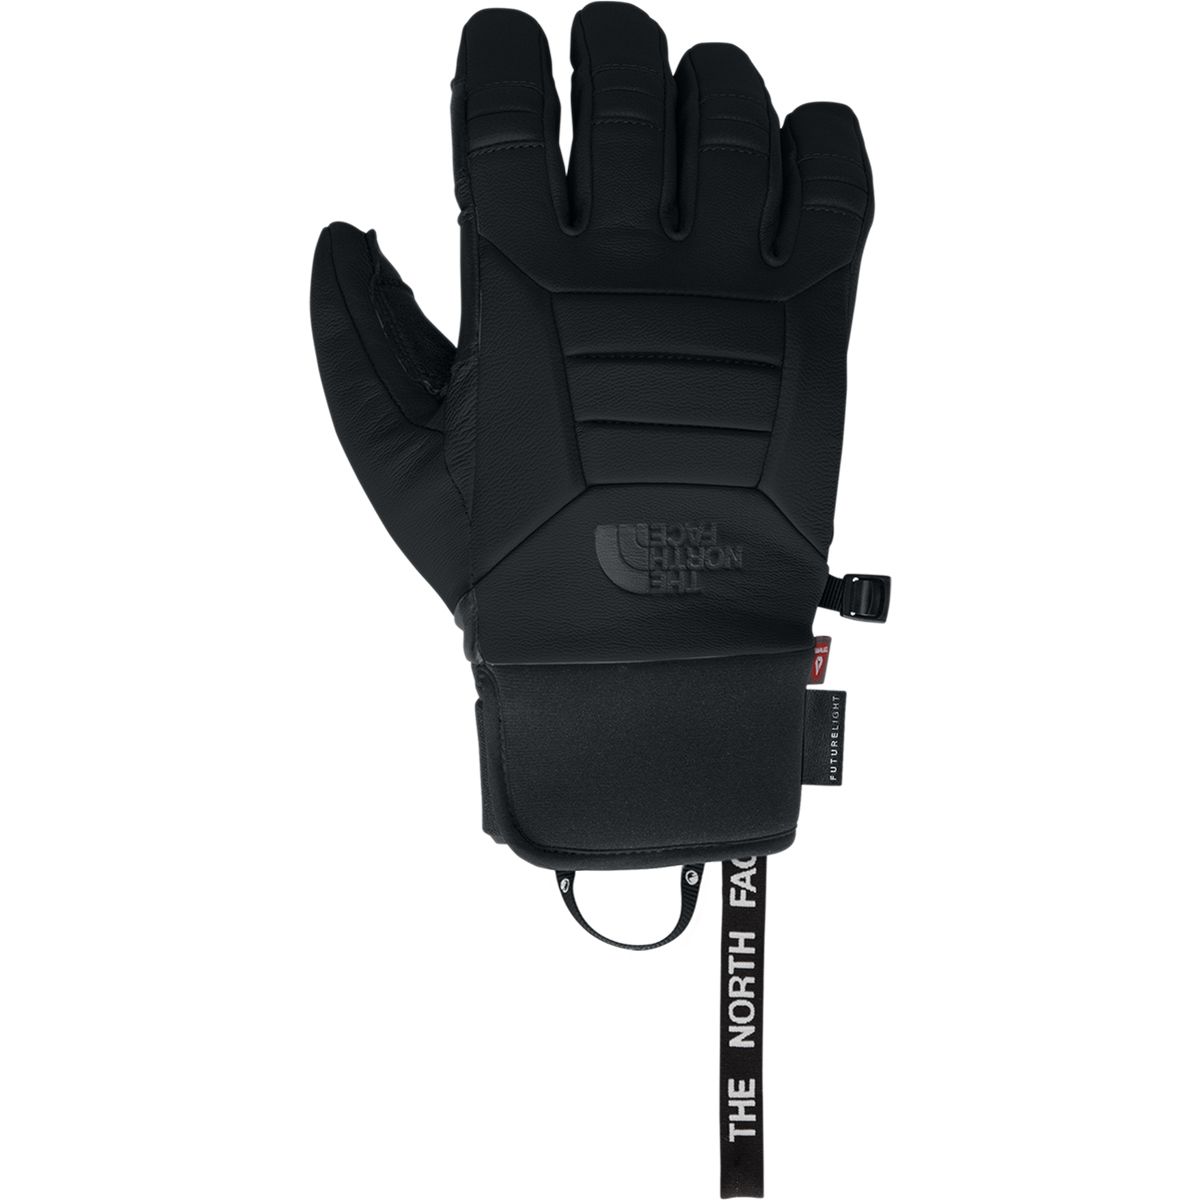 north face gloves phone